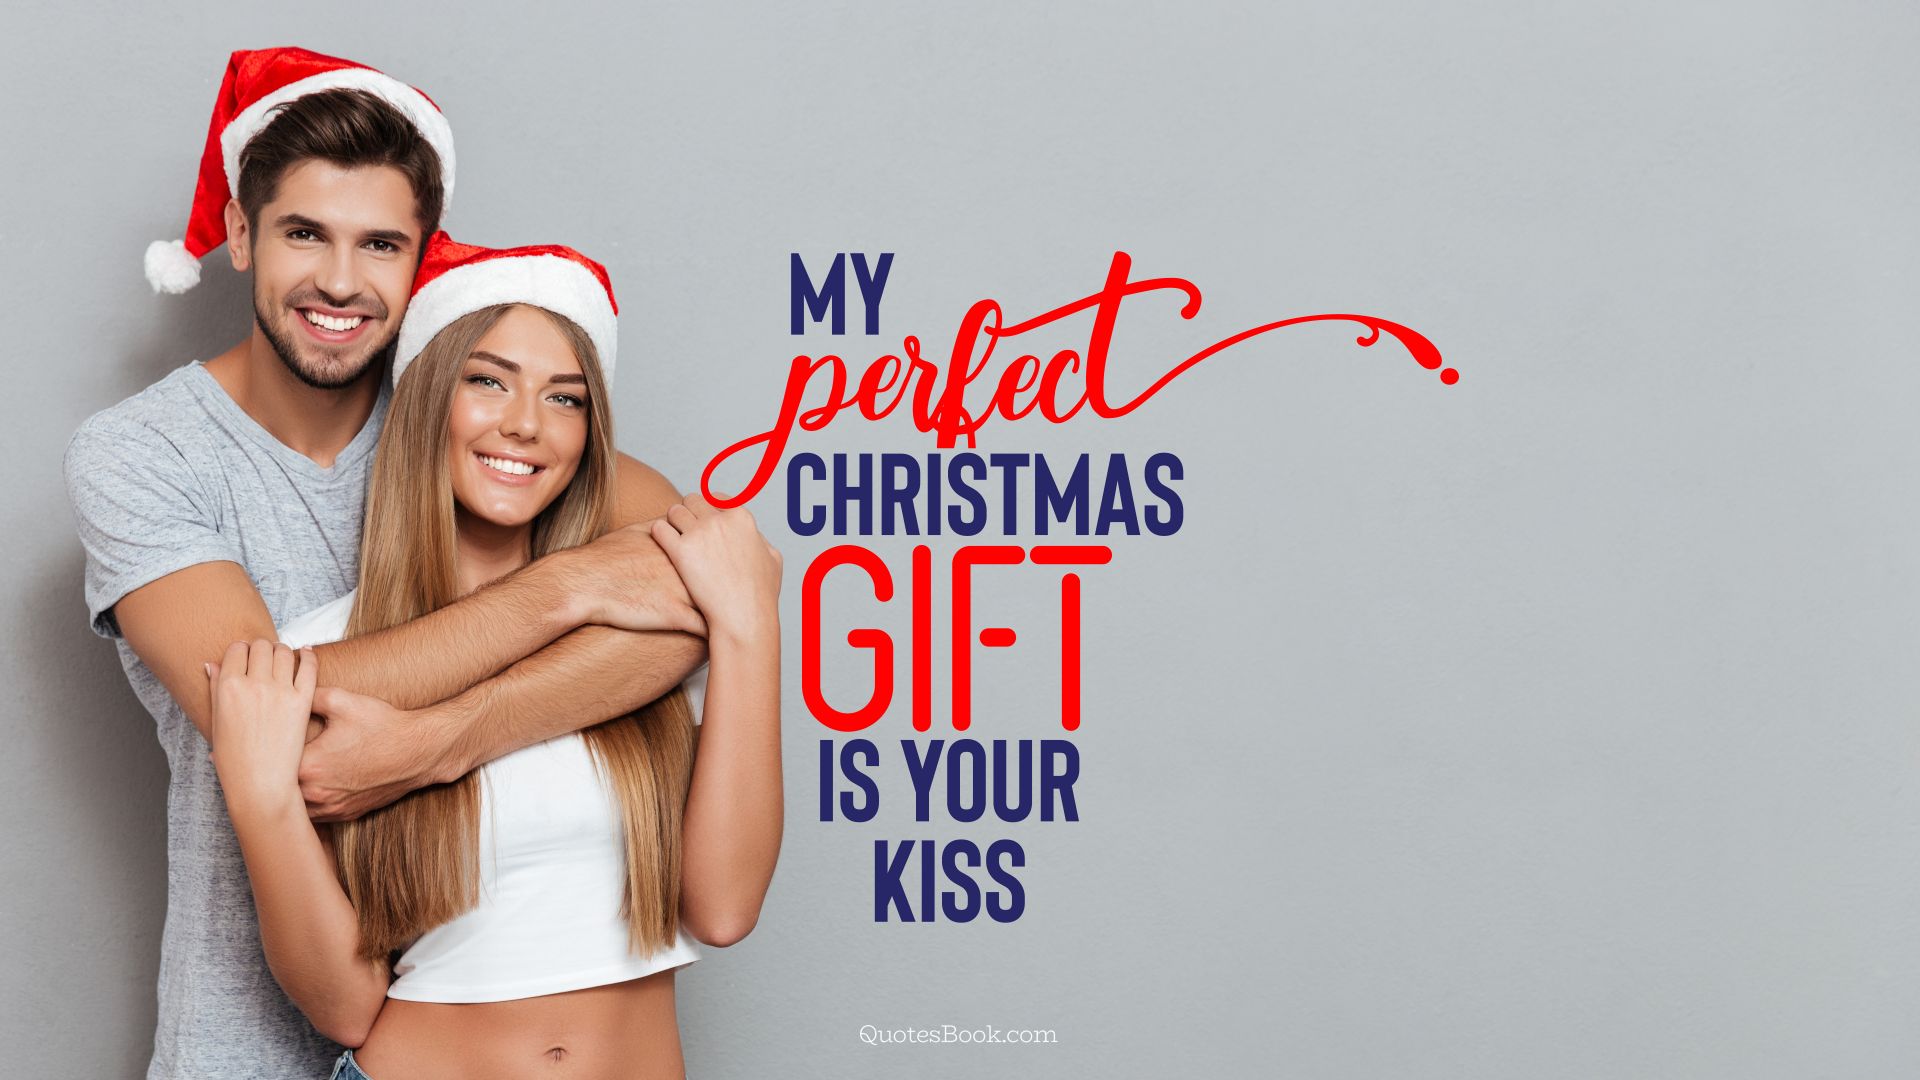 My perfect Christmas gift is your kiss. - Quote by QuotesBook